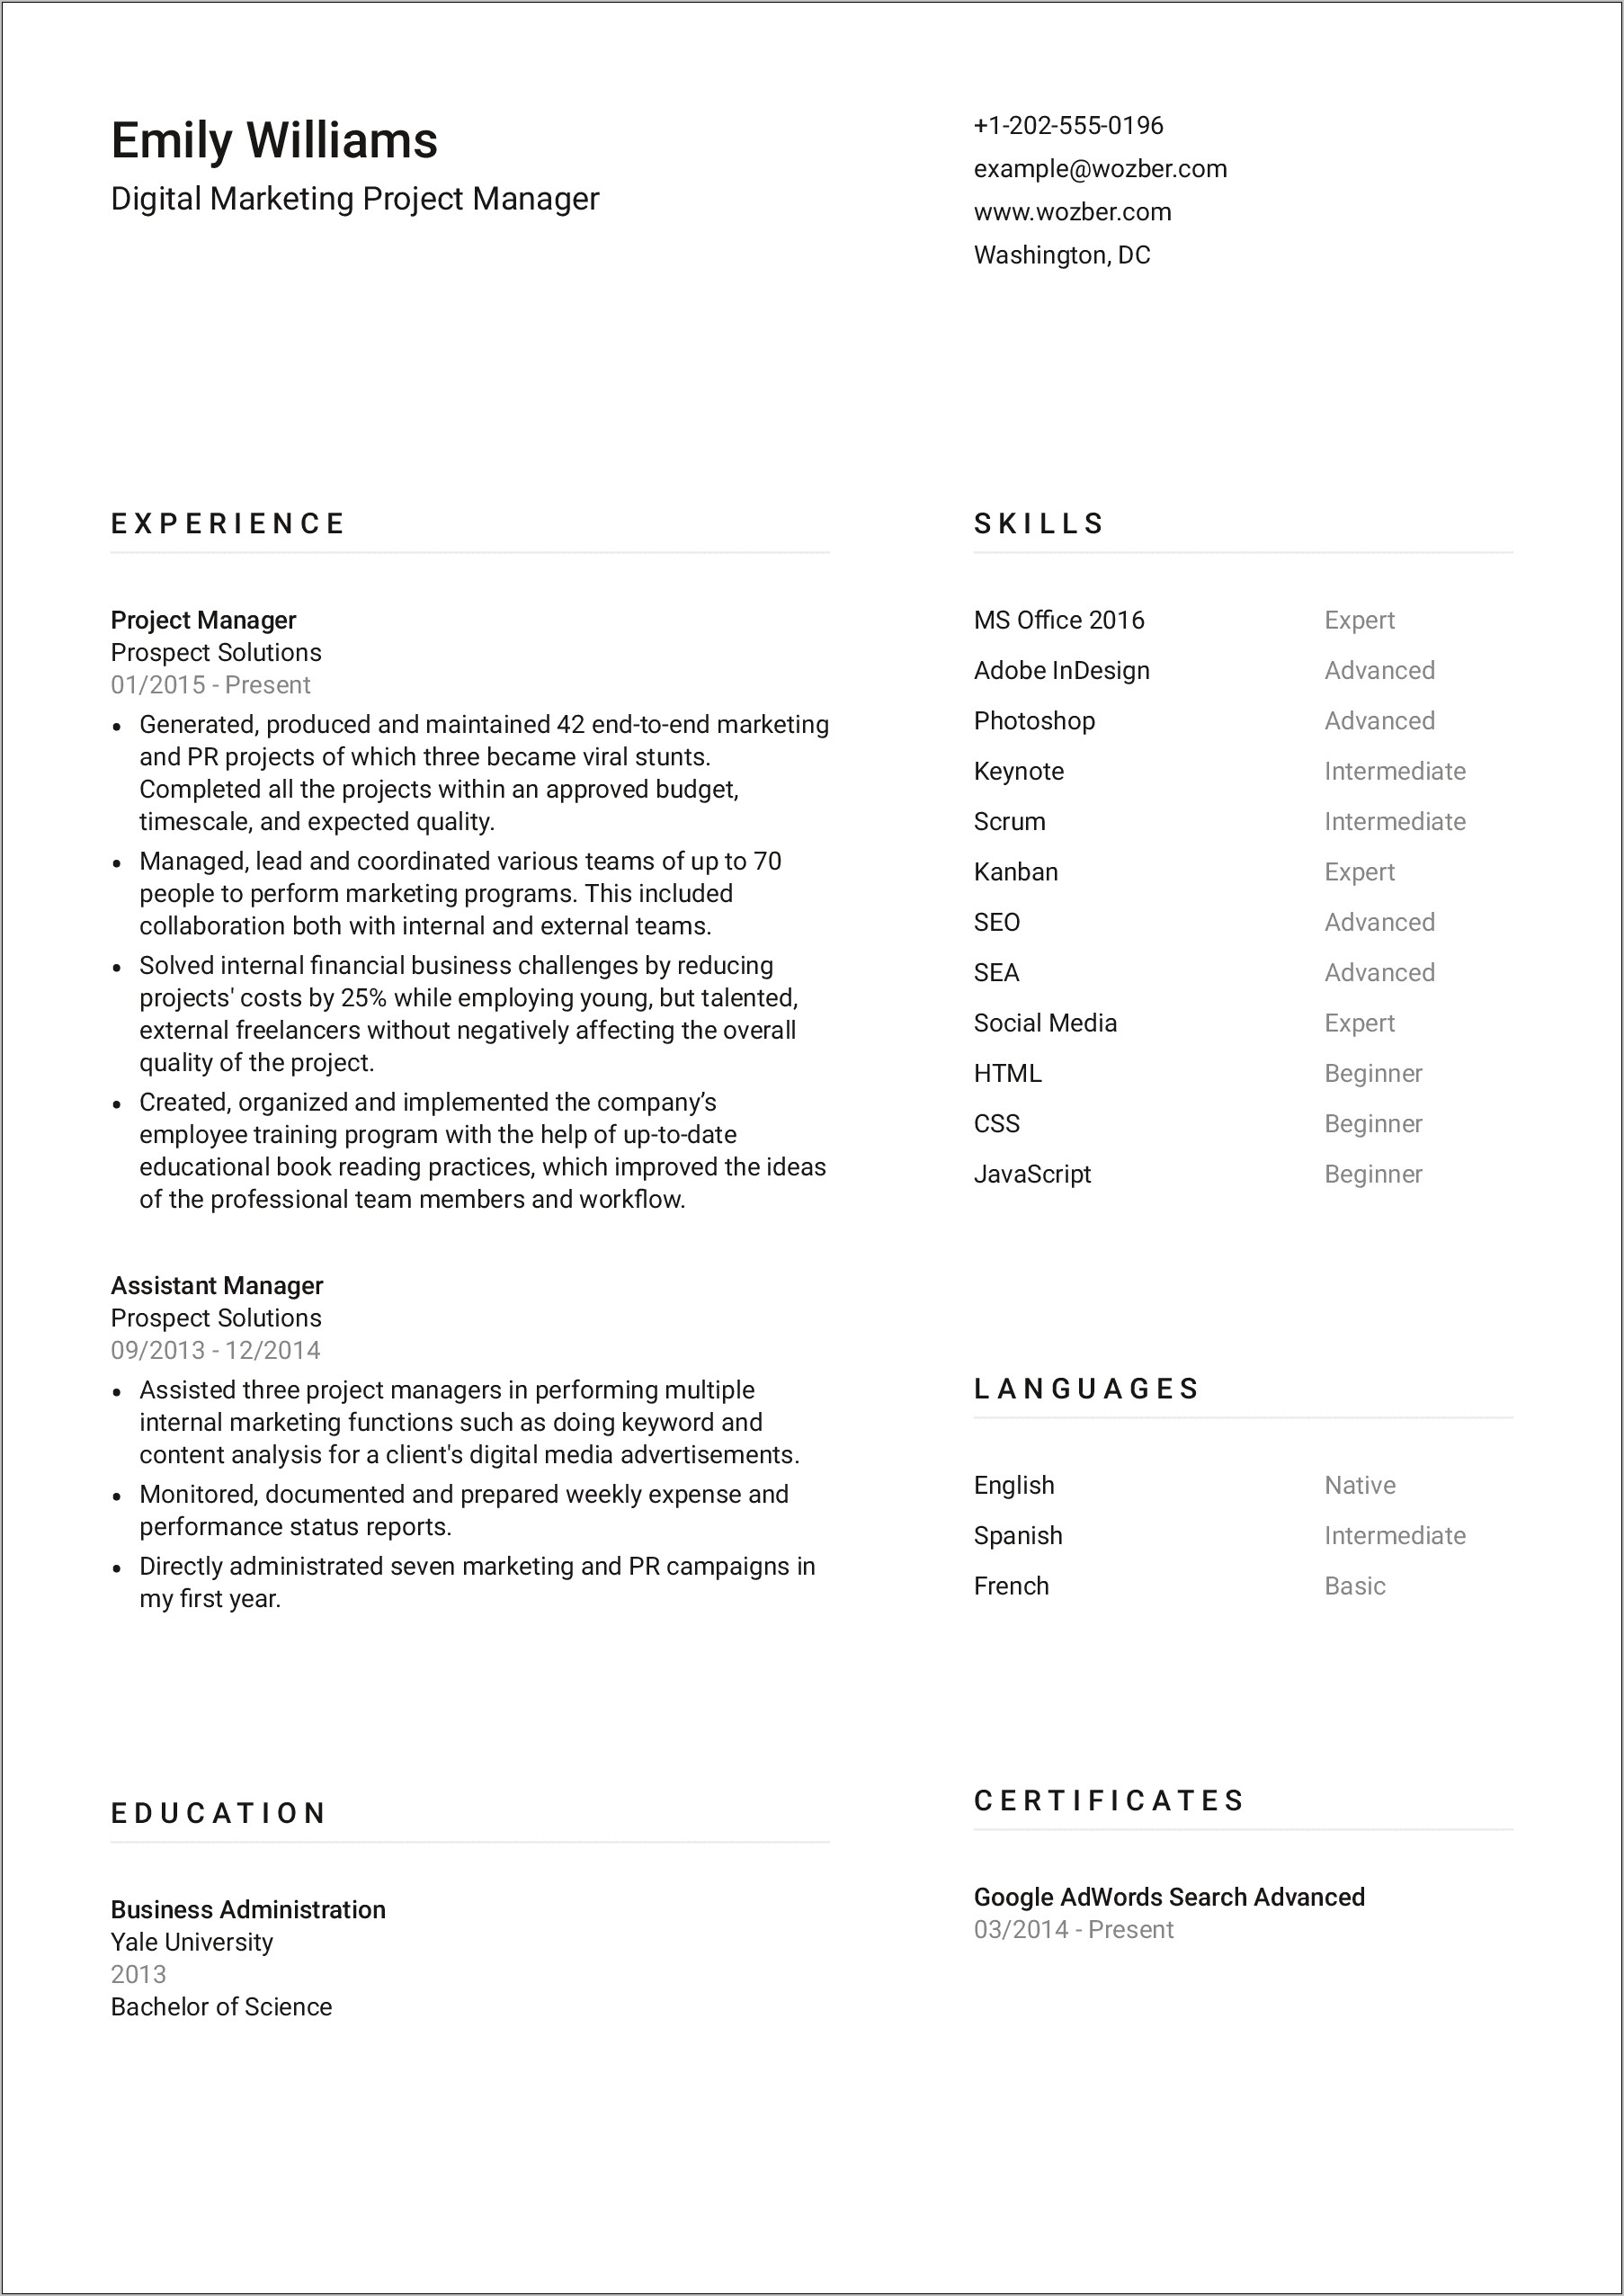 Assistant Manager Quality Resume Format